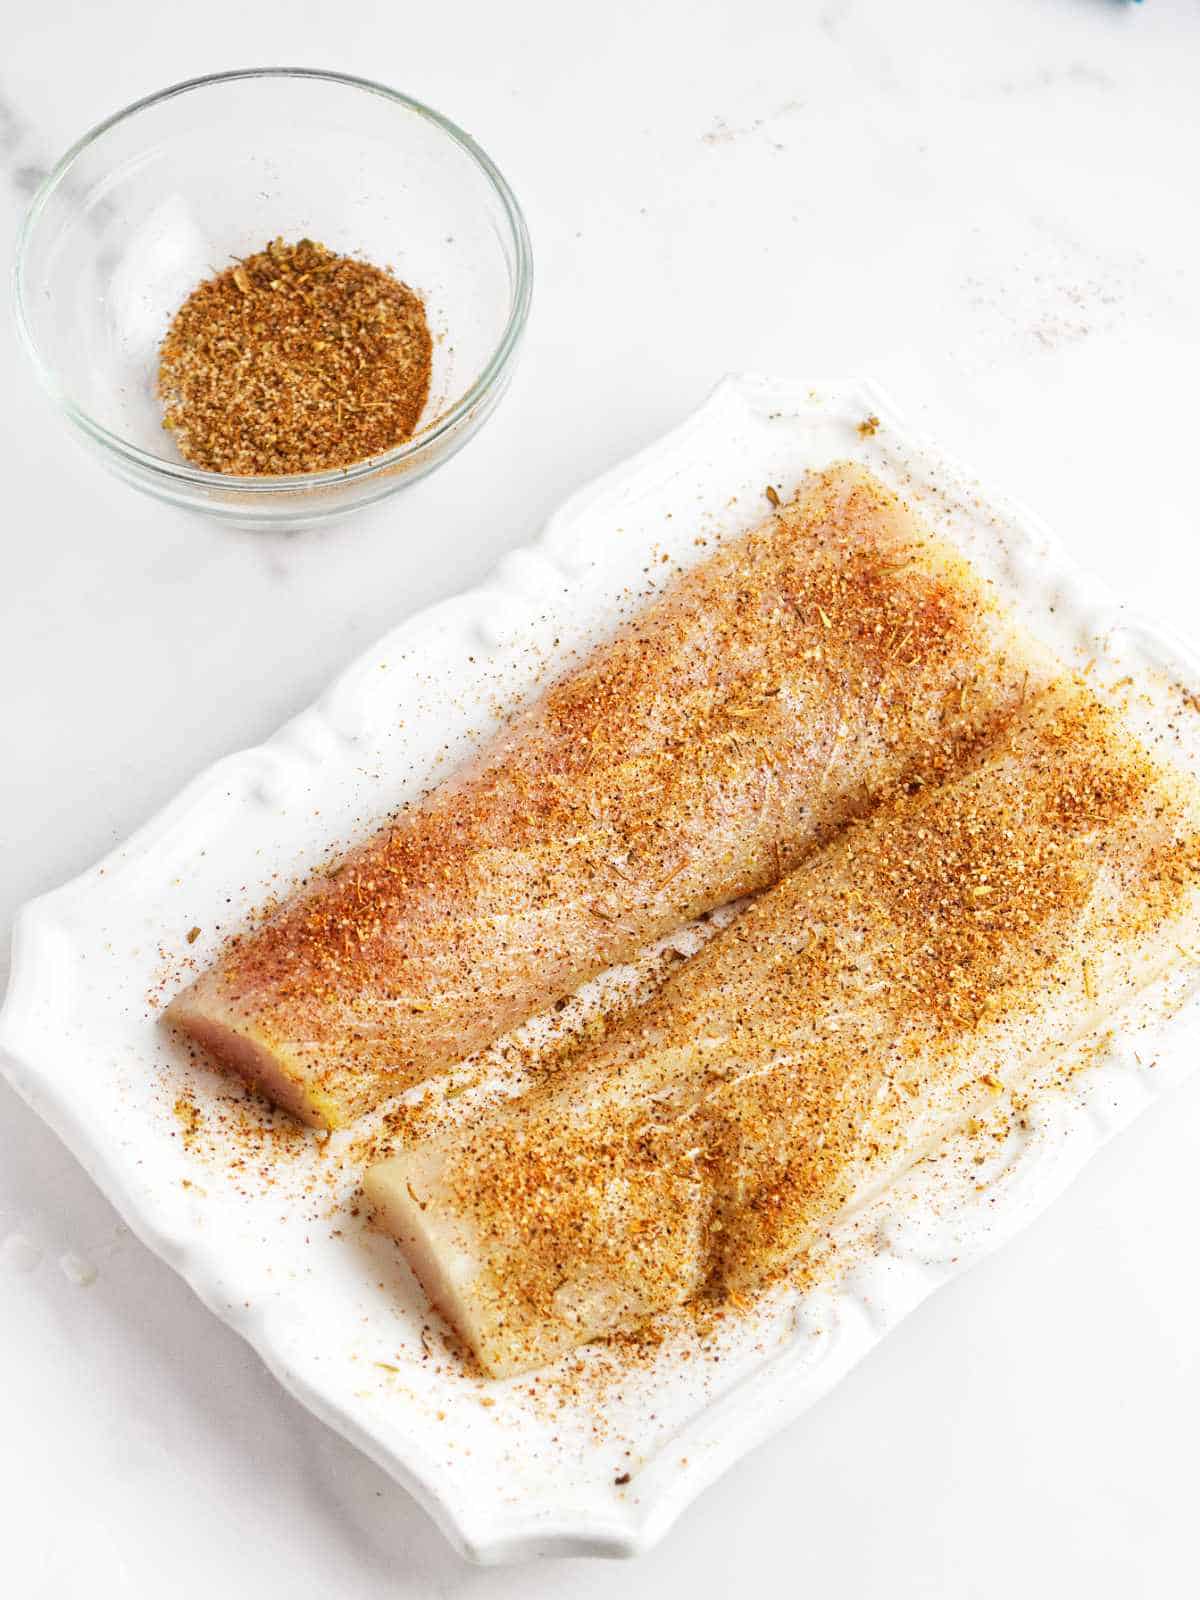 fish fillets with blackening spice sprinkled on.